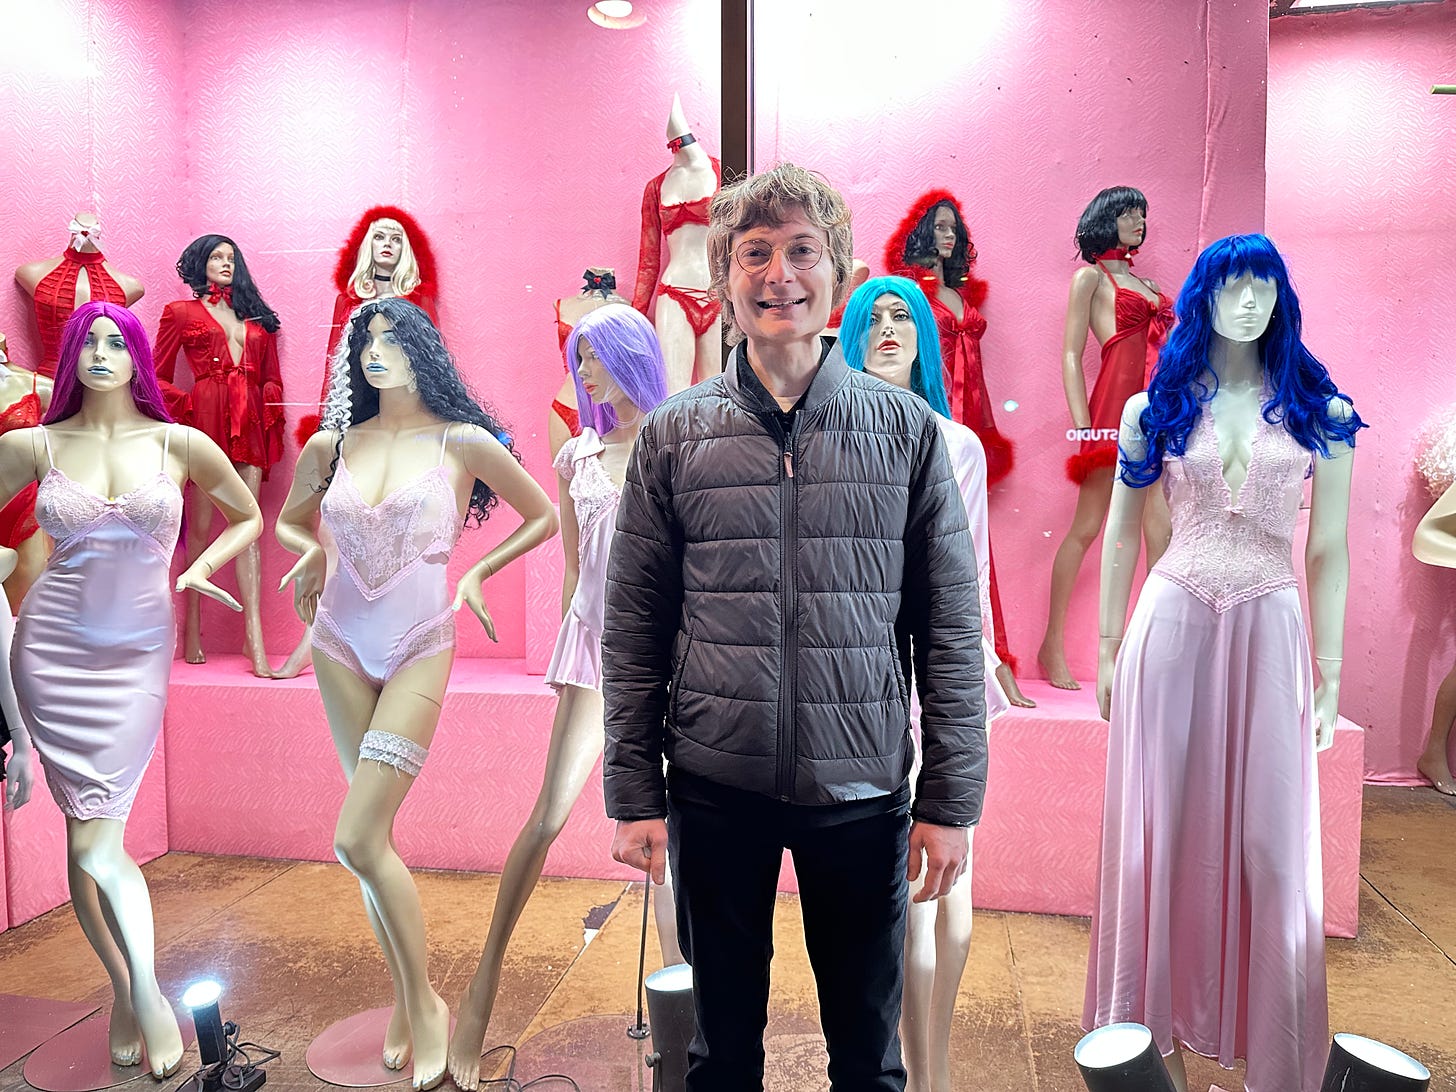 Me standing in front of a lingerie window display with a silly smile on my face.